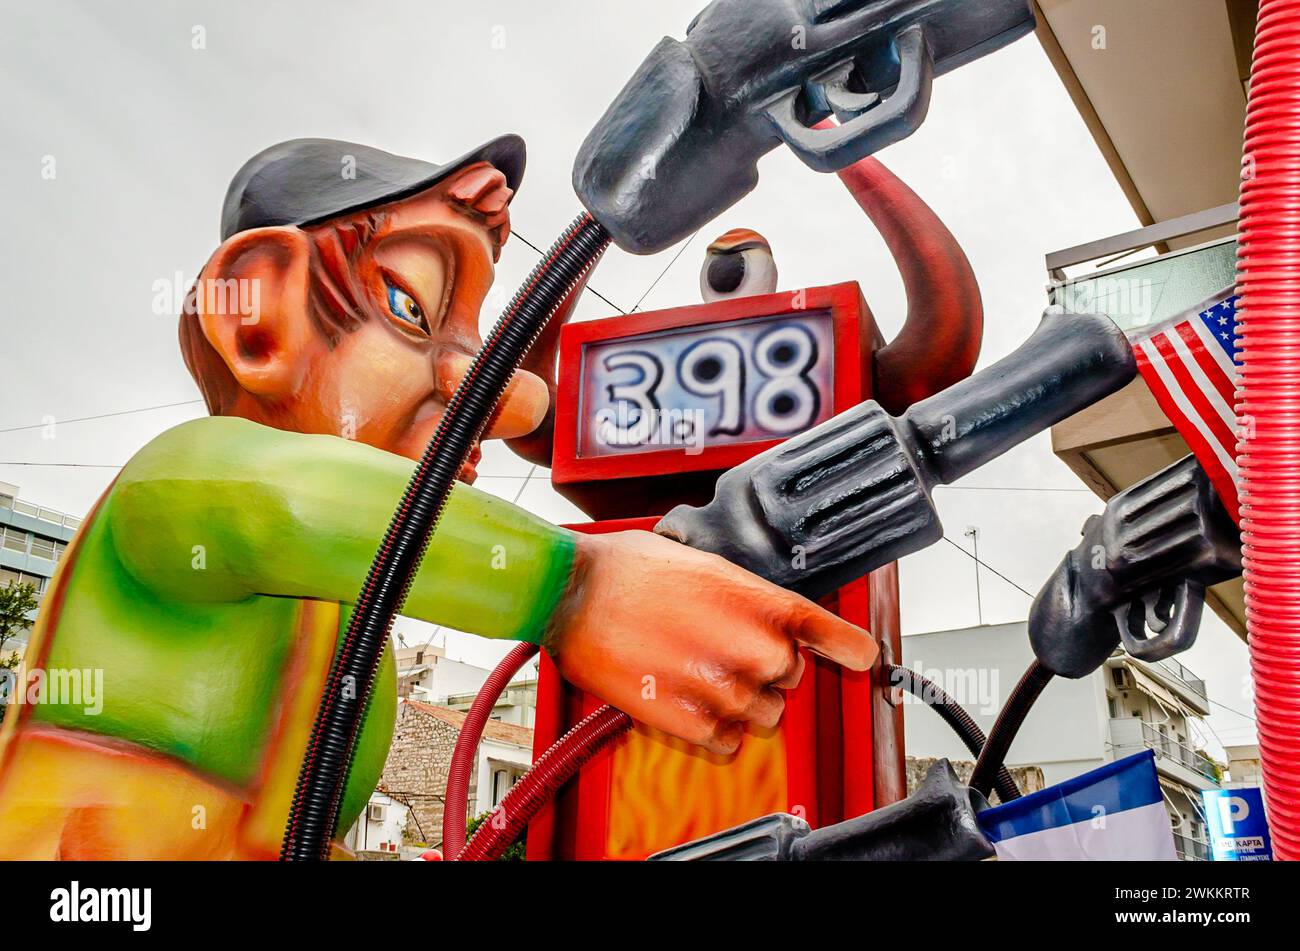 Giant Carnival Float Satirizes Gas Prices in Europe. Funny Sculpture of an Employee Holding a Pump - Gun. Great Annual Parade with Colored Statues. Stock Photo